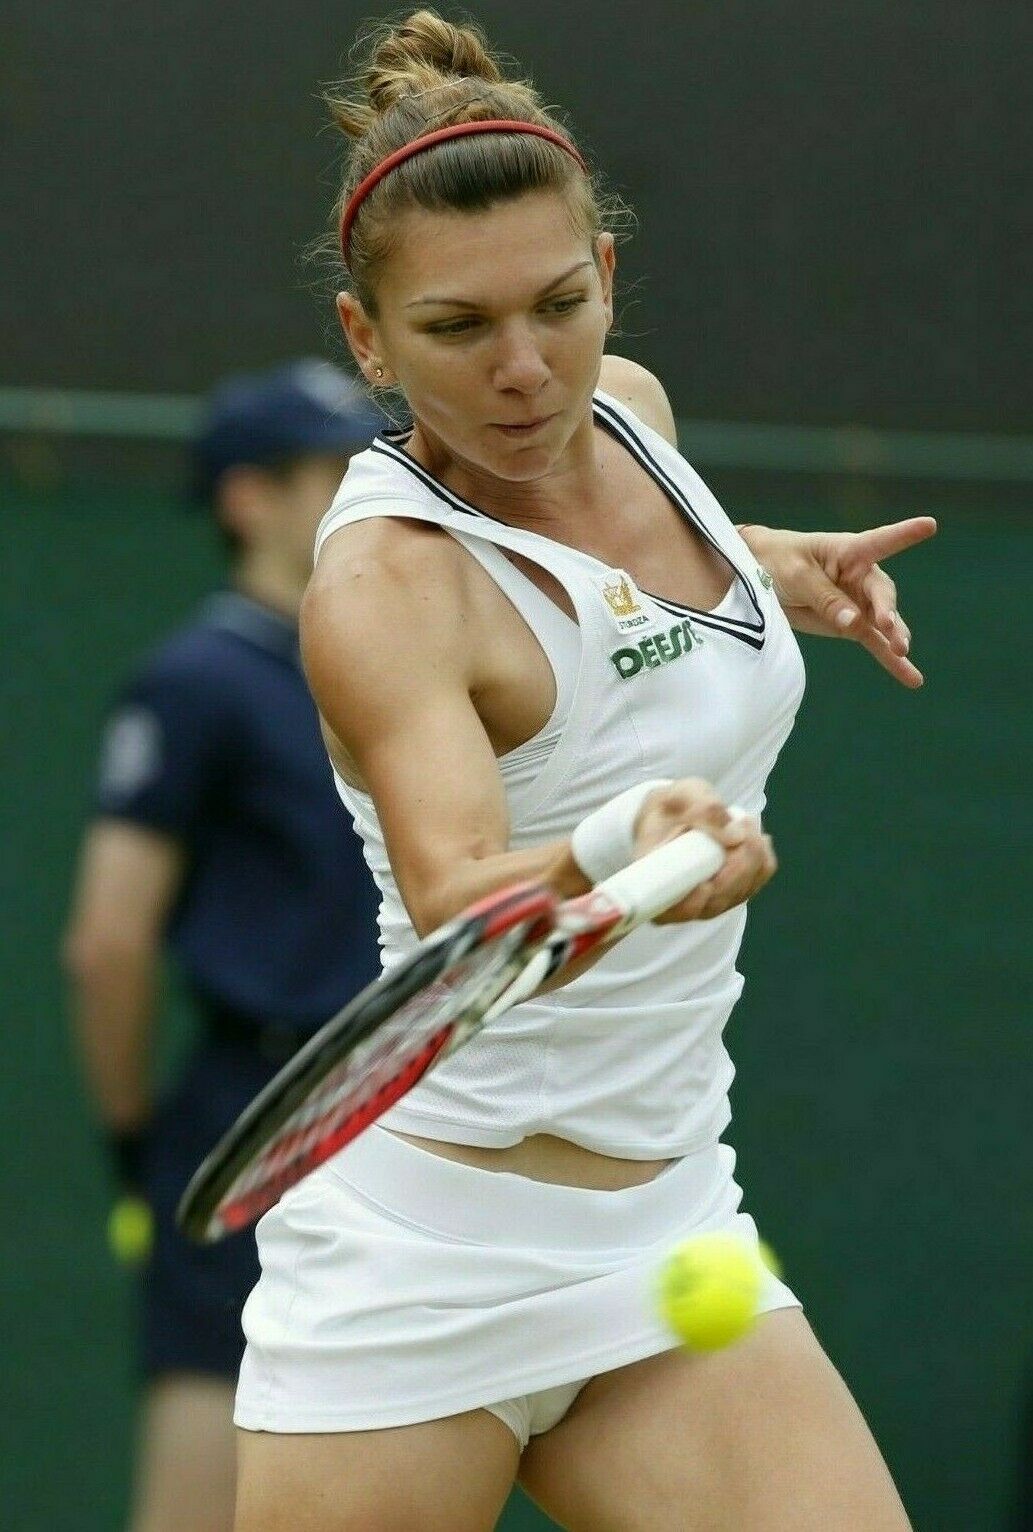 Simona Halep Sexy Busty Tennis Player ~ 4x6 Glossy Photo ~ Hot Picture (#8) F1